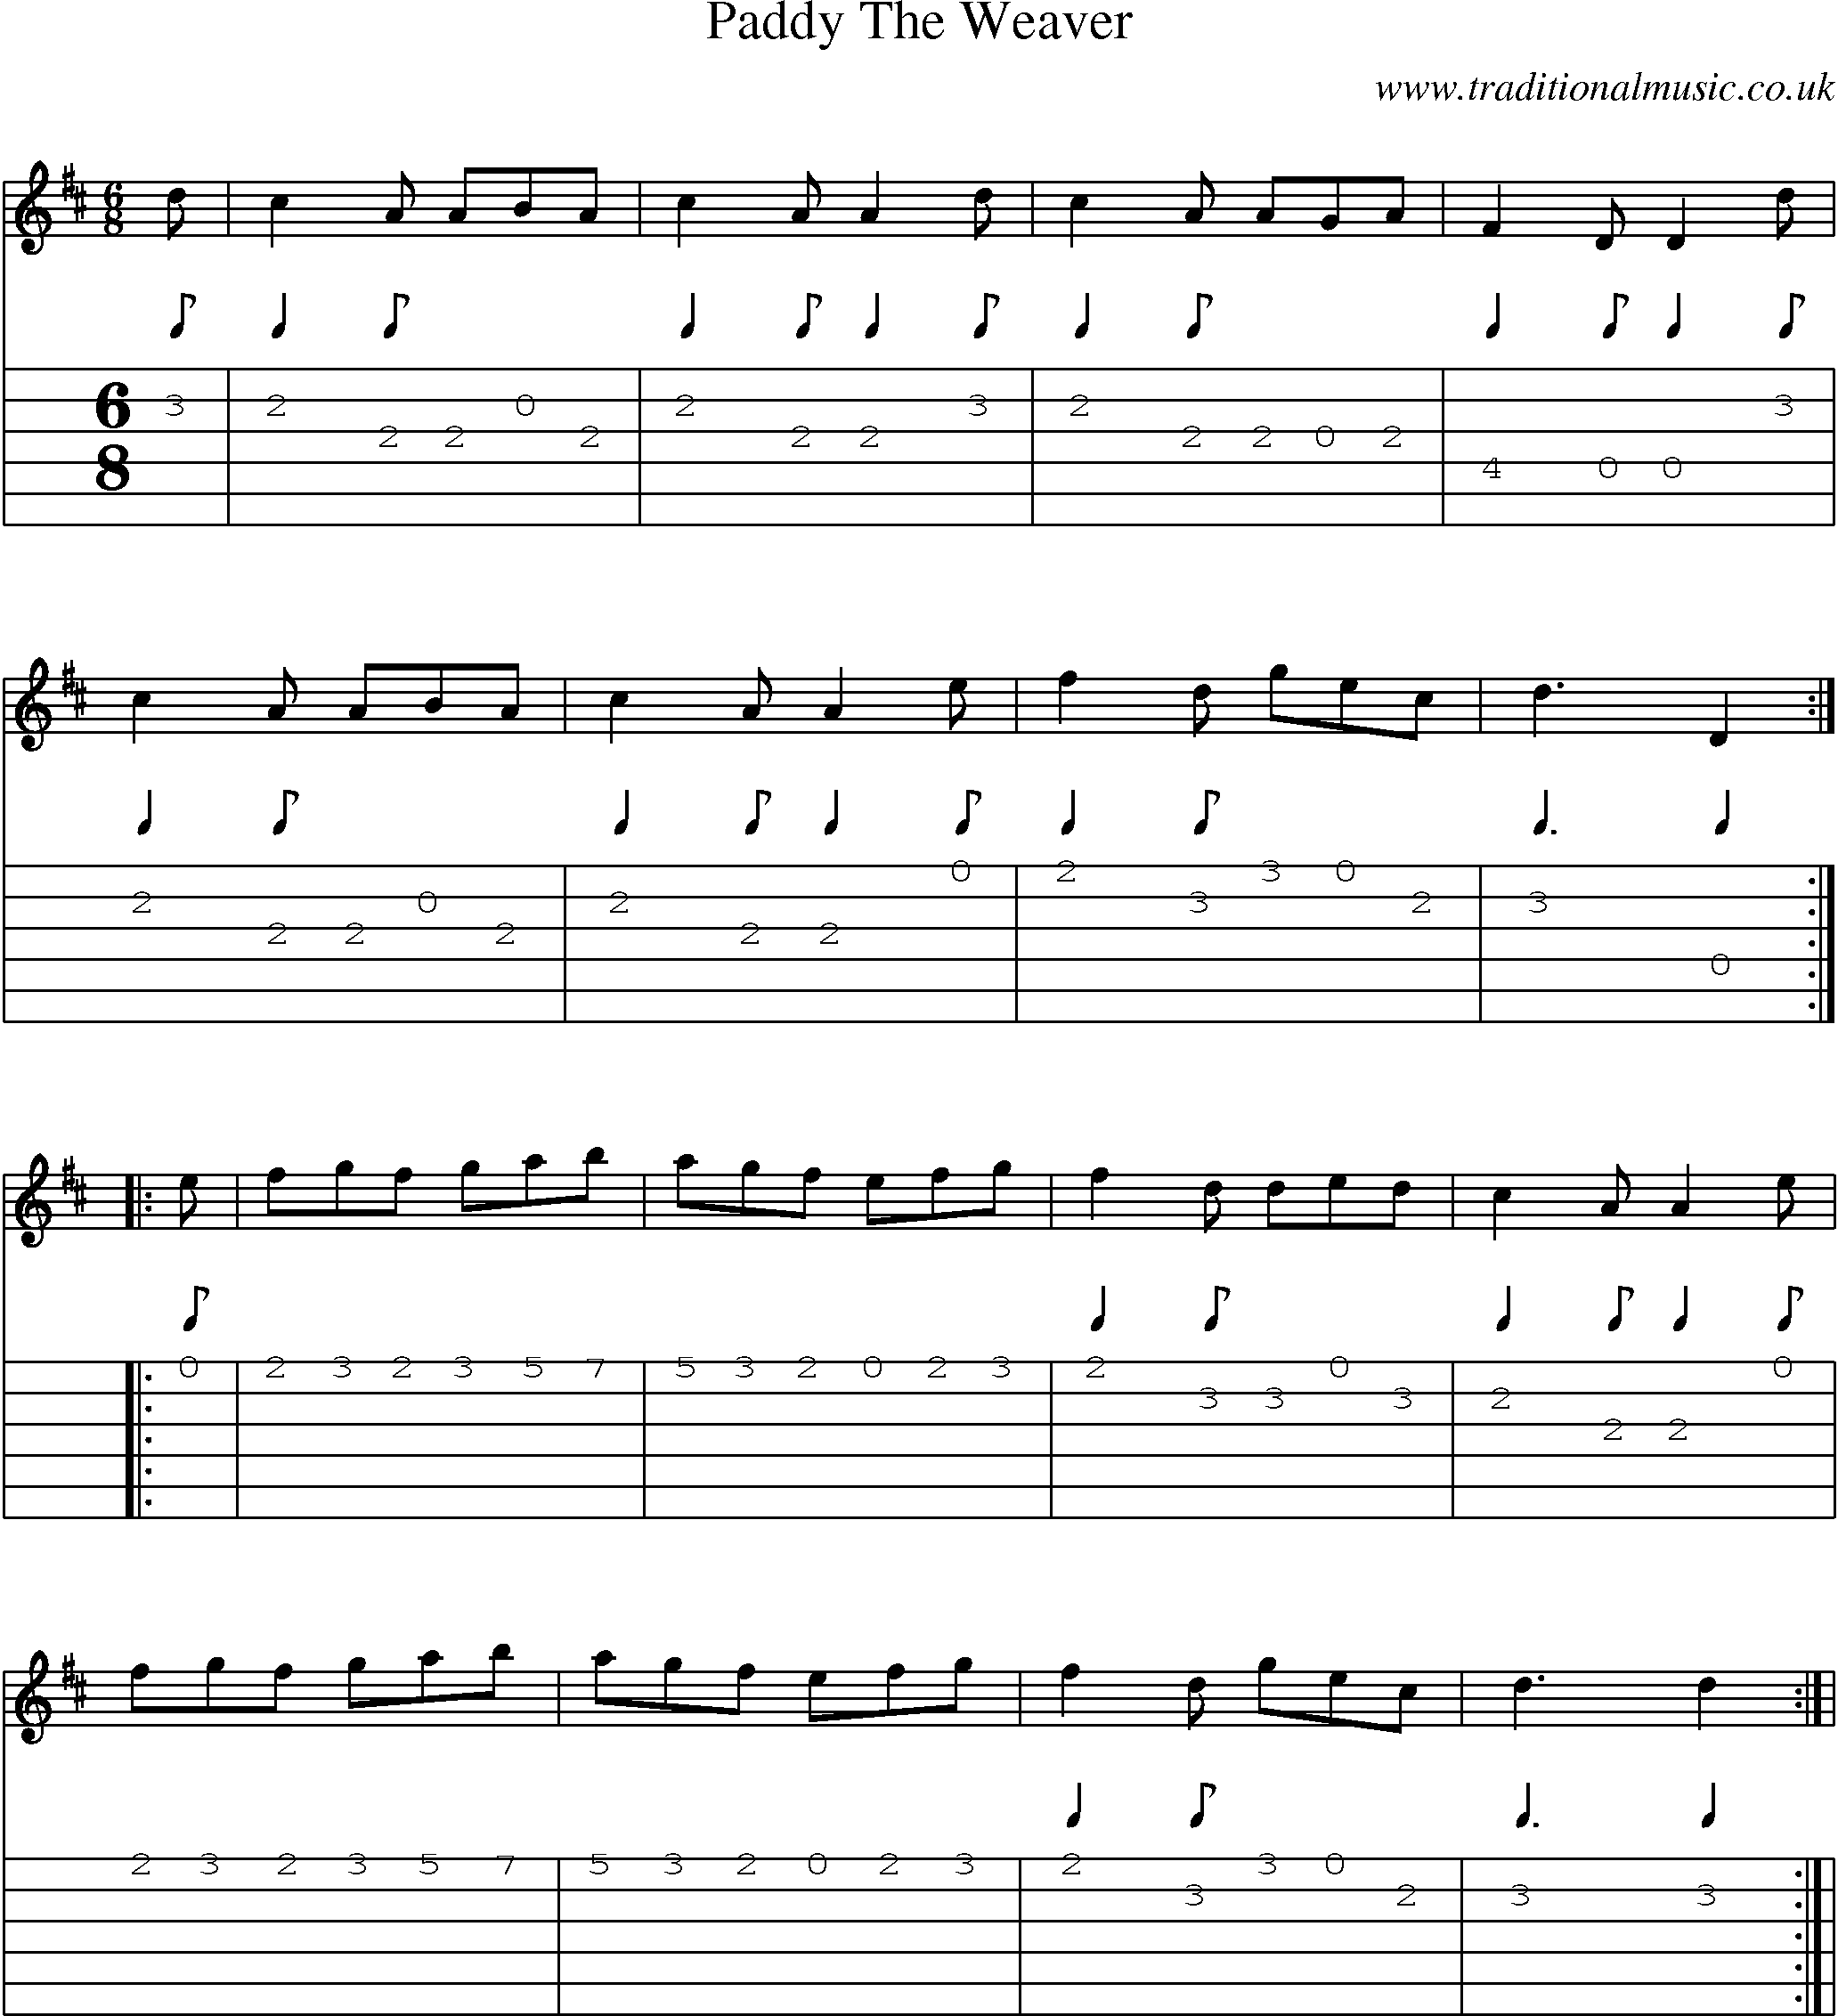 Music Score and Guitar Tabs for Paddy Weaver